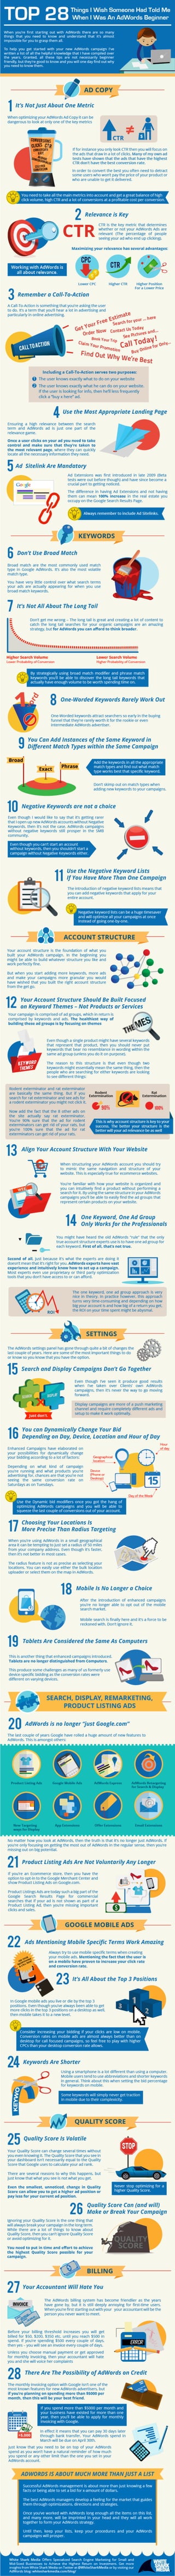 [infographic] Top 28 things i wish someone had told me when i was an ad words beginner